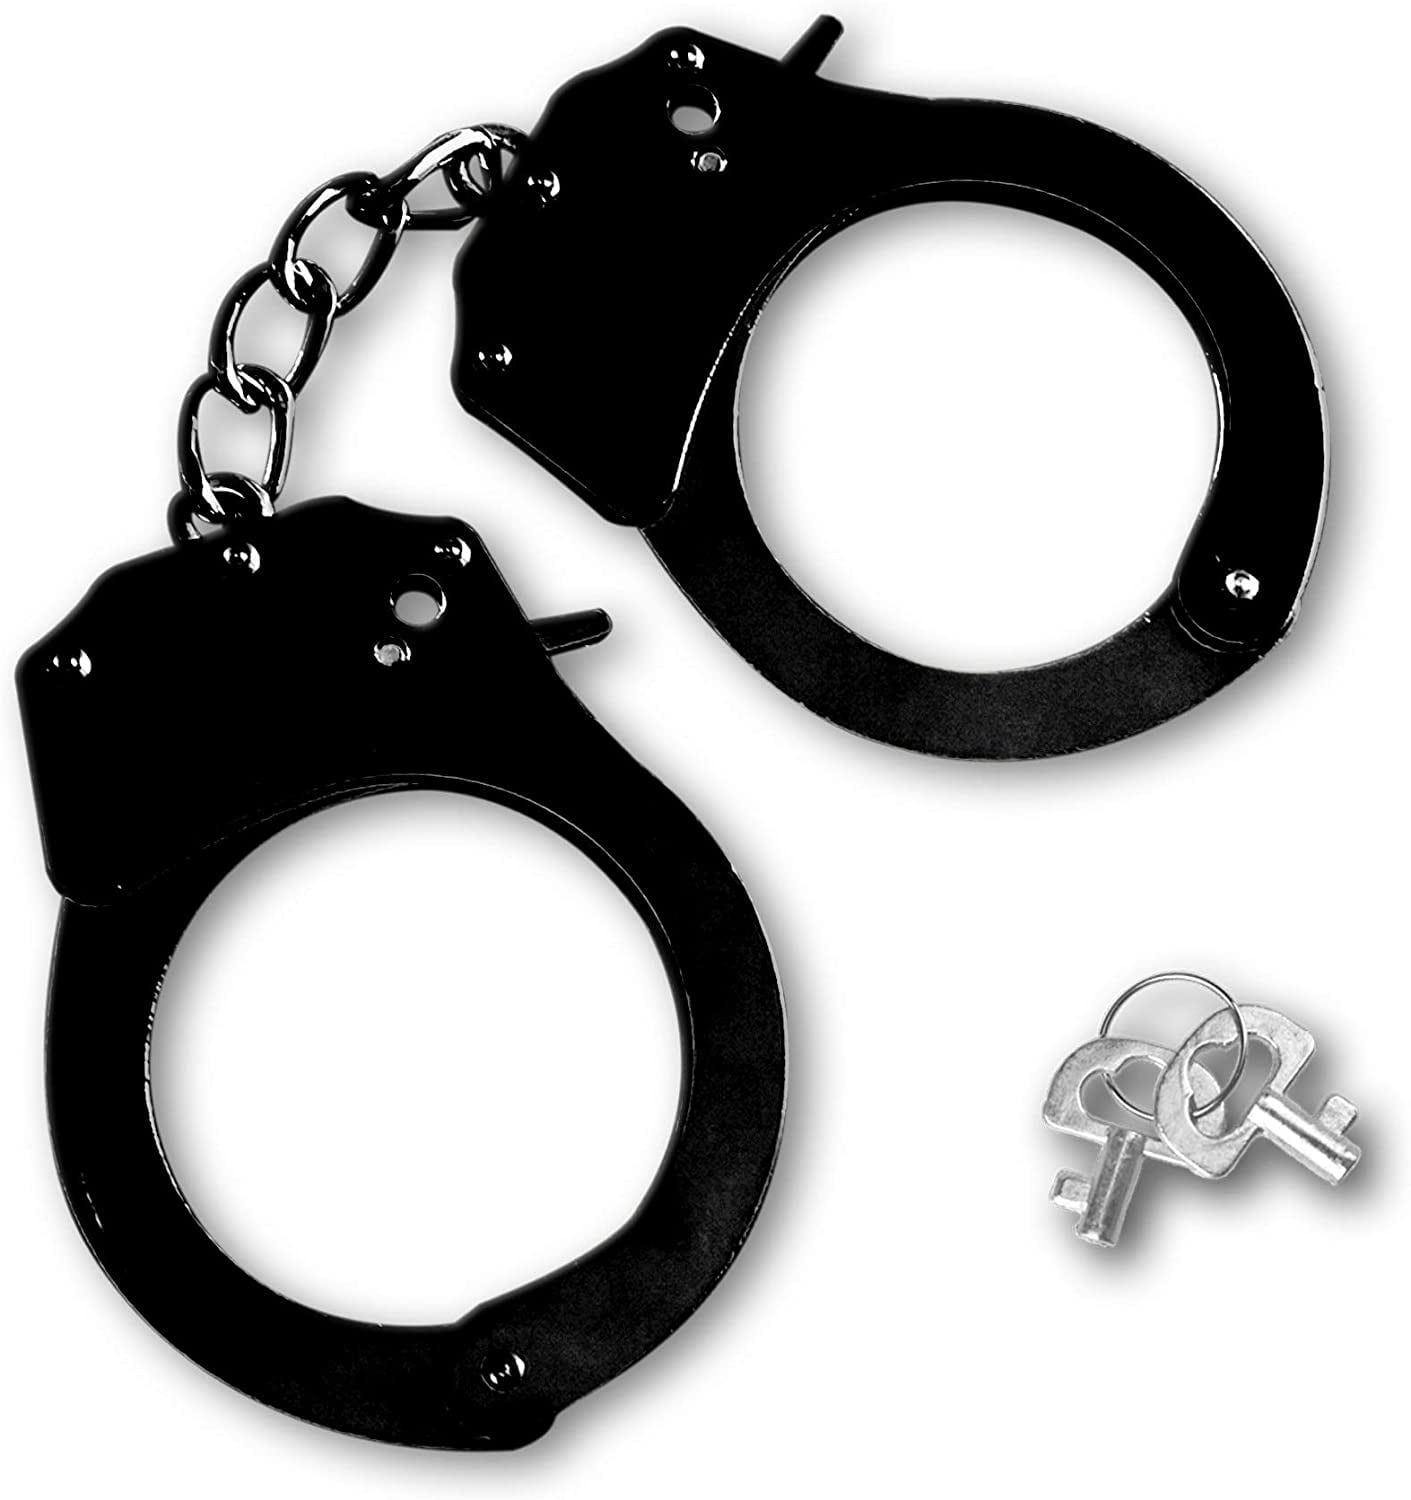 Police Bear or Pig Patch gag Gift badge Free working handcuffs Keychain 